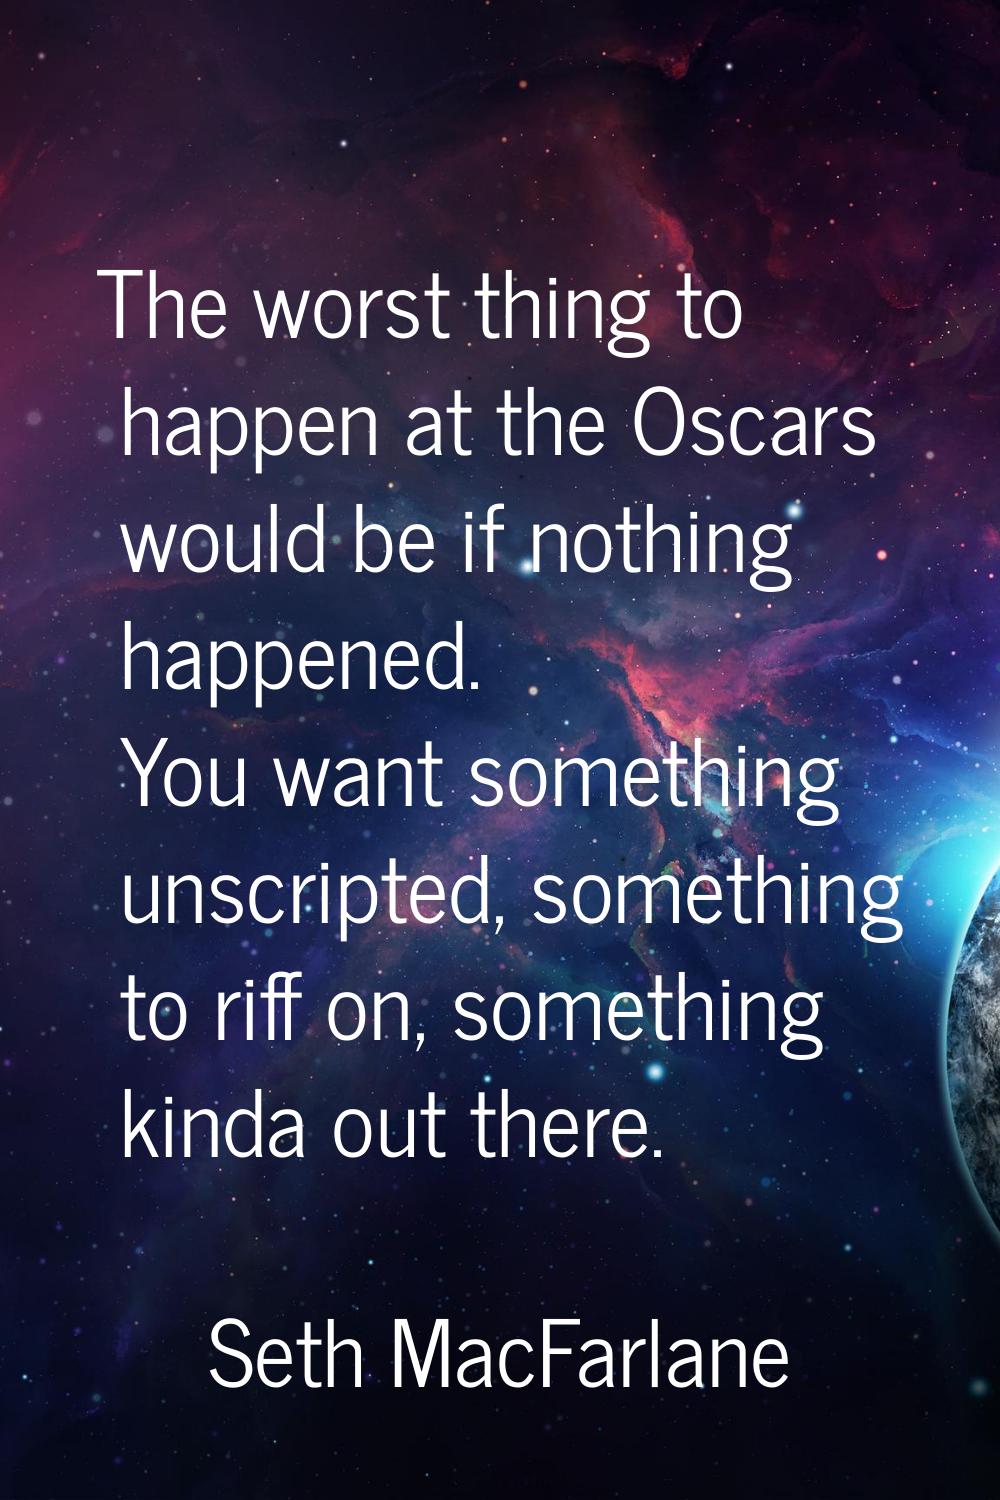 The worst thing to happen at the Oscars would be if nothing happened. You want something unscripted